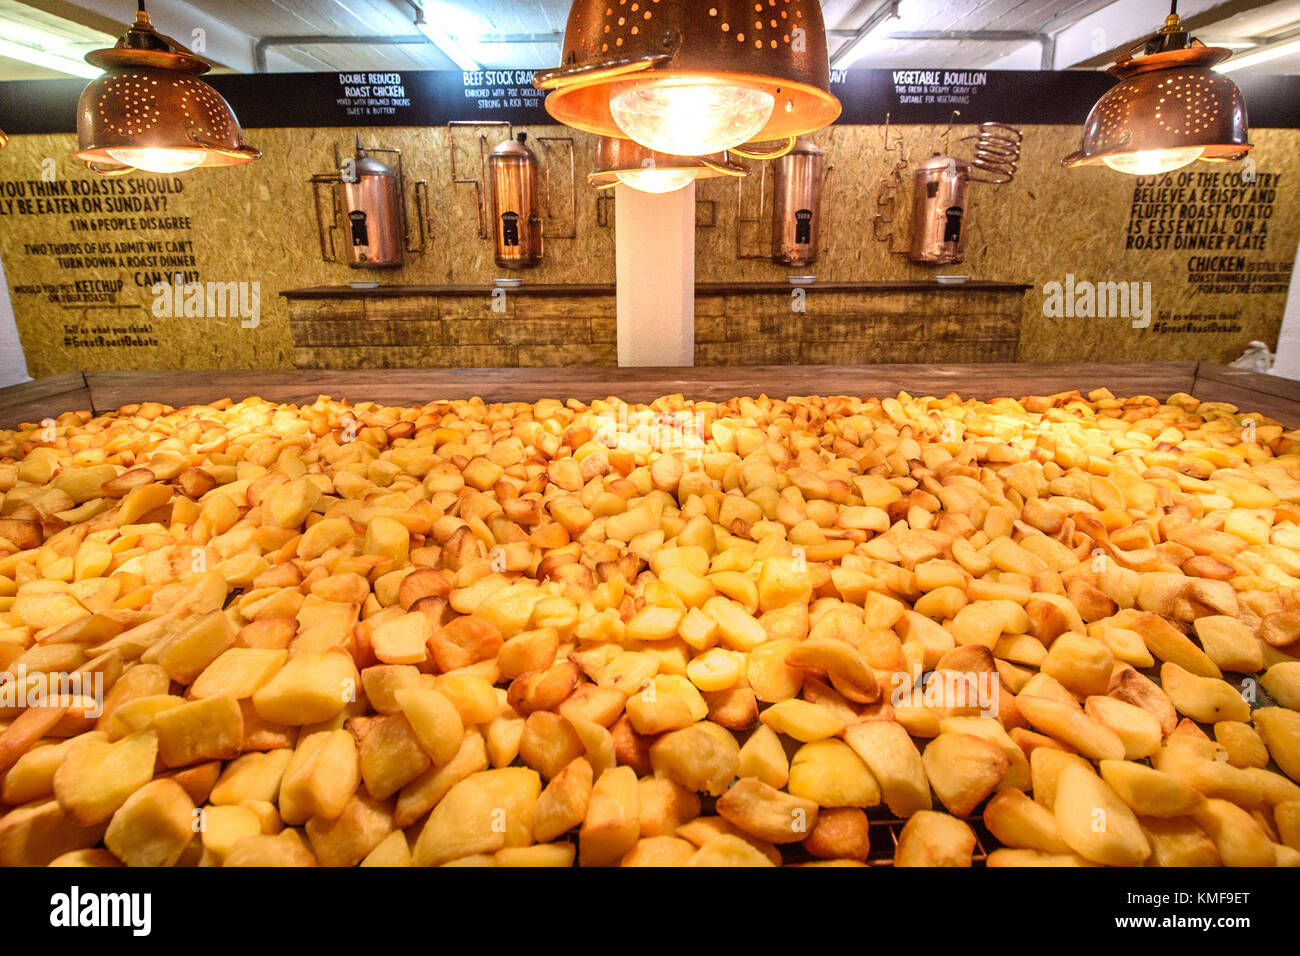 The giant roast potato platter at the McCain Roastaurant in Shoreditch, east London, which features over 100,000 varieties of roast dinner. Stock Photo